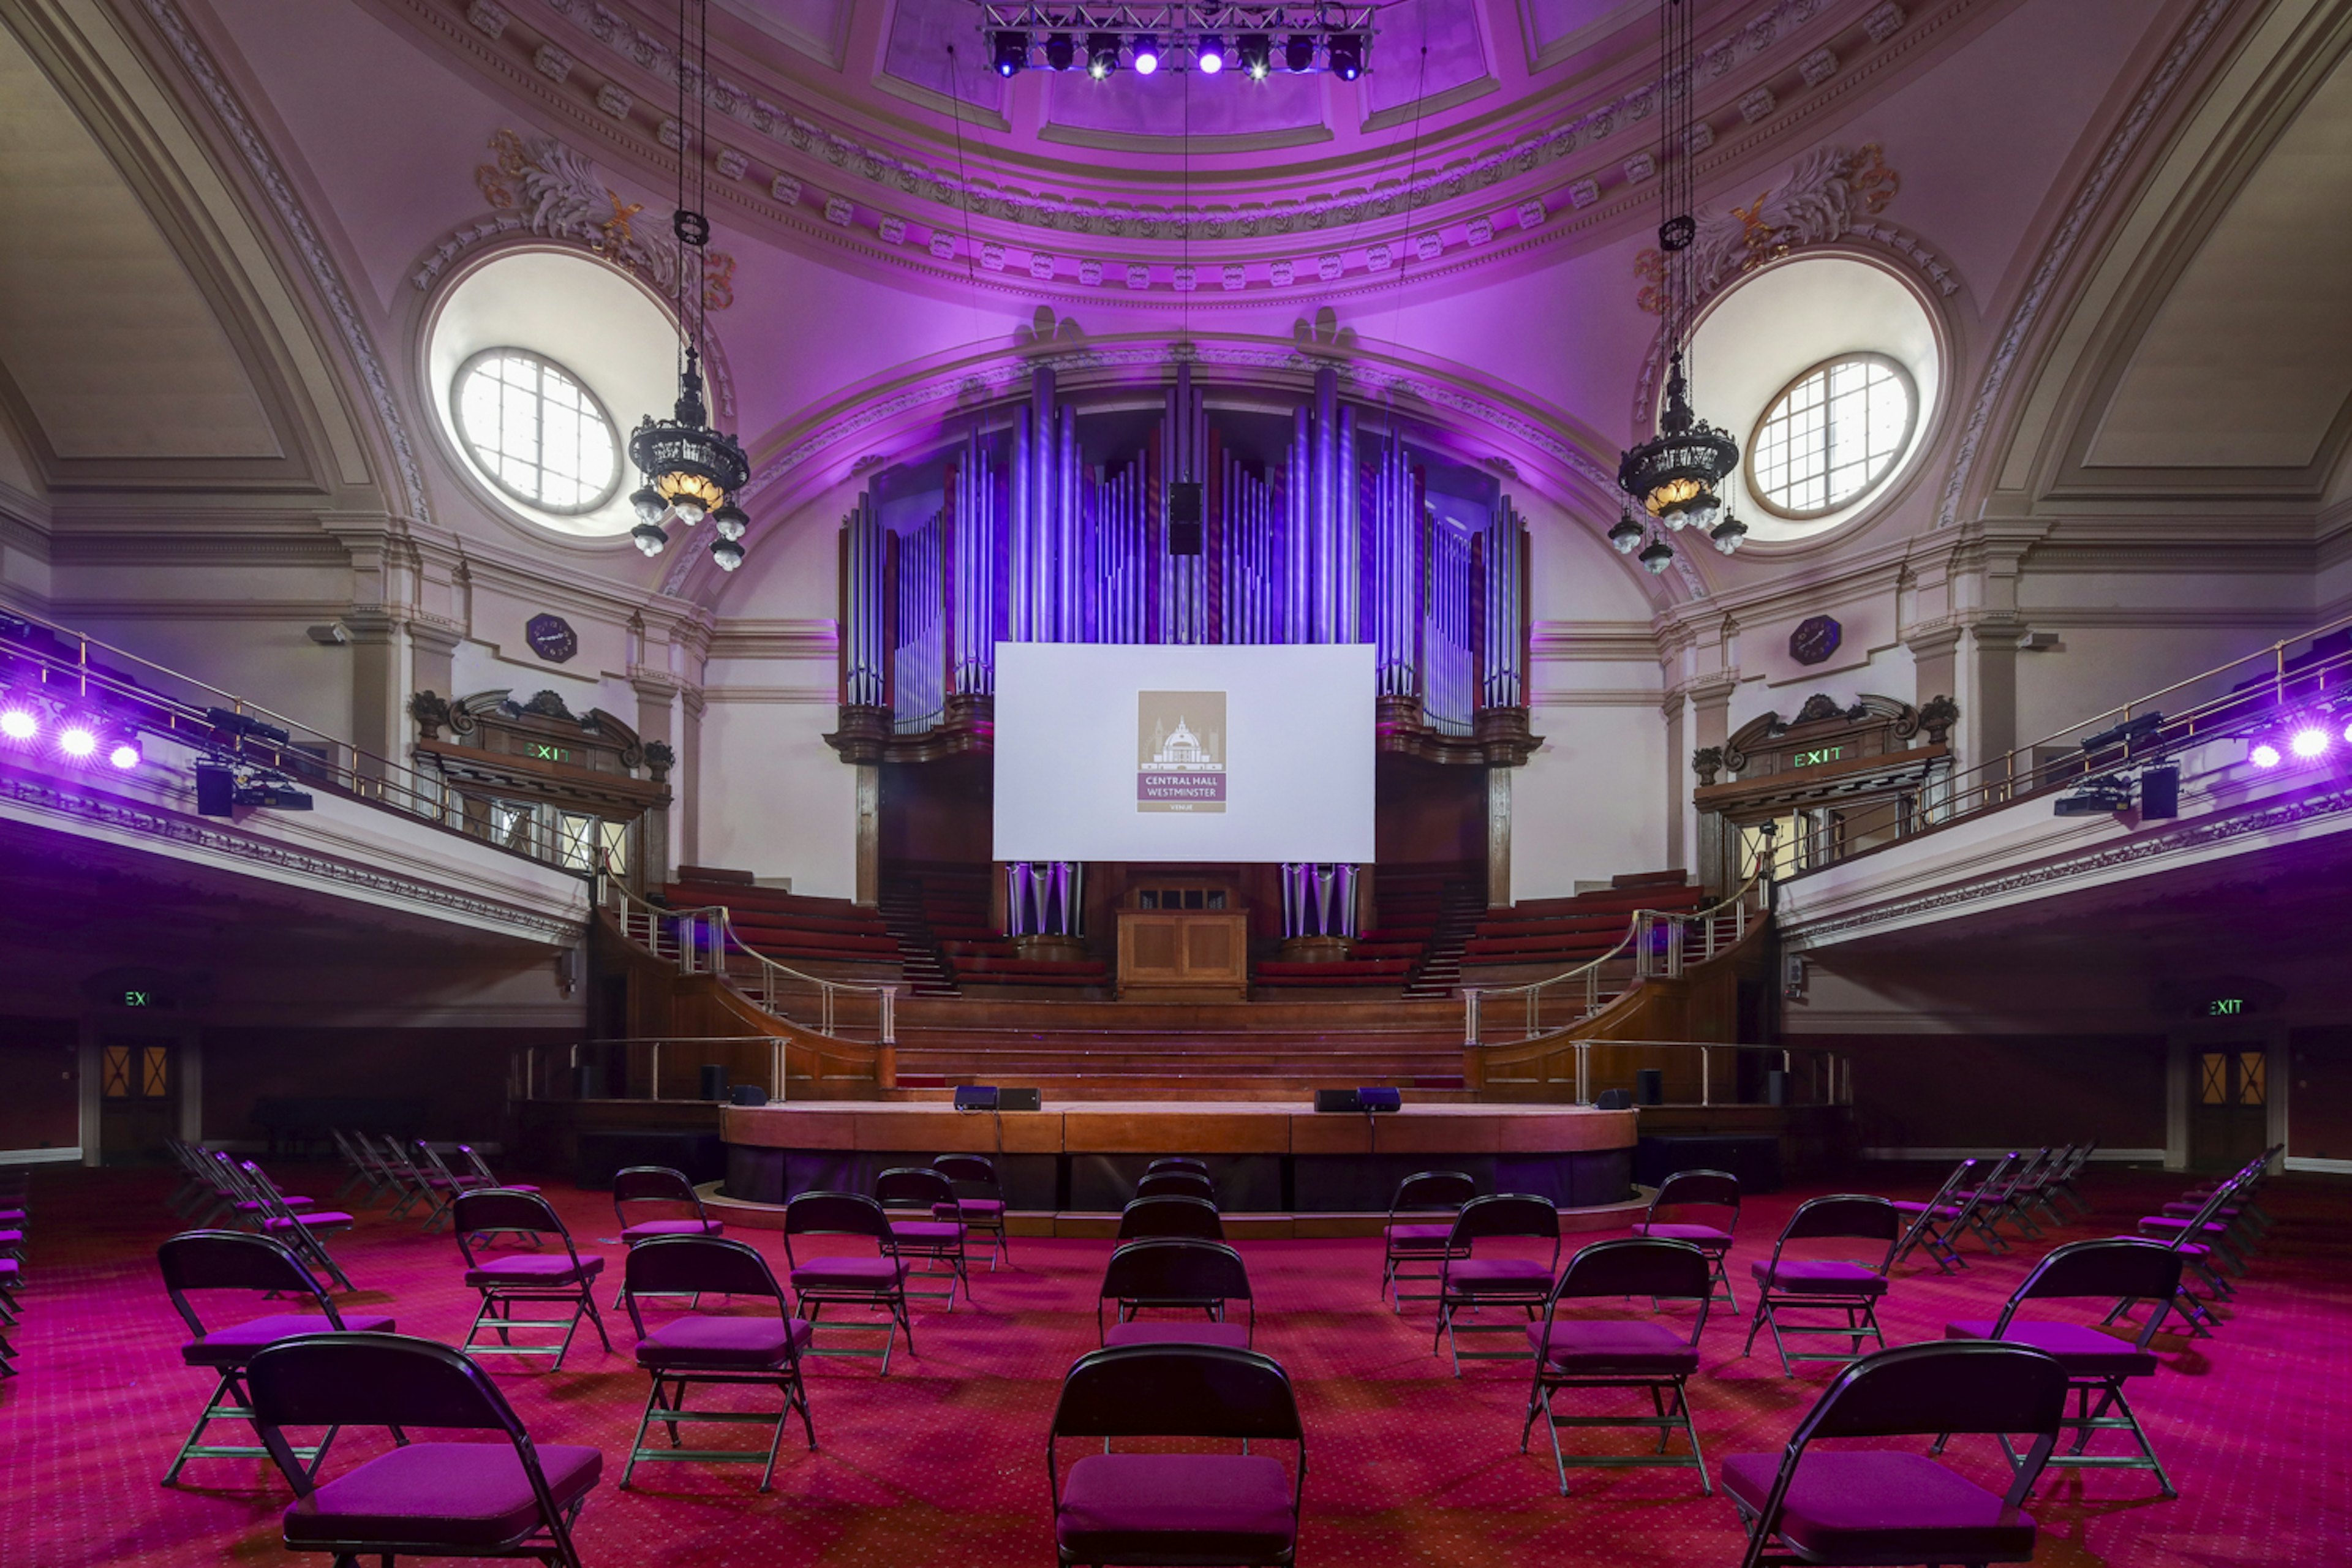 Large Conference Venues - Central Hall Westminster - Events in The Great Hall - Banner